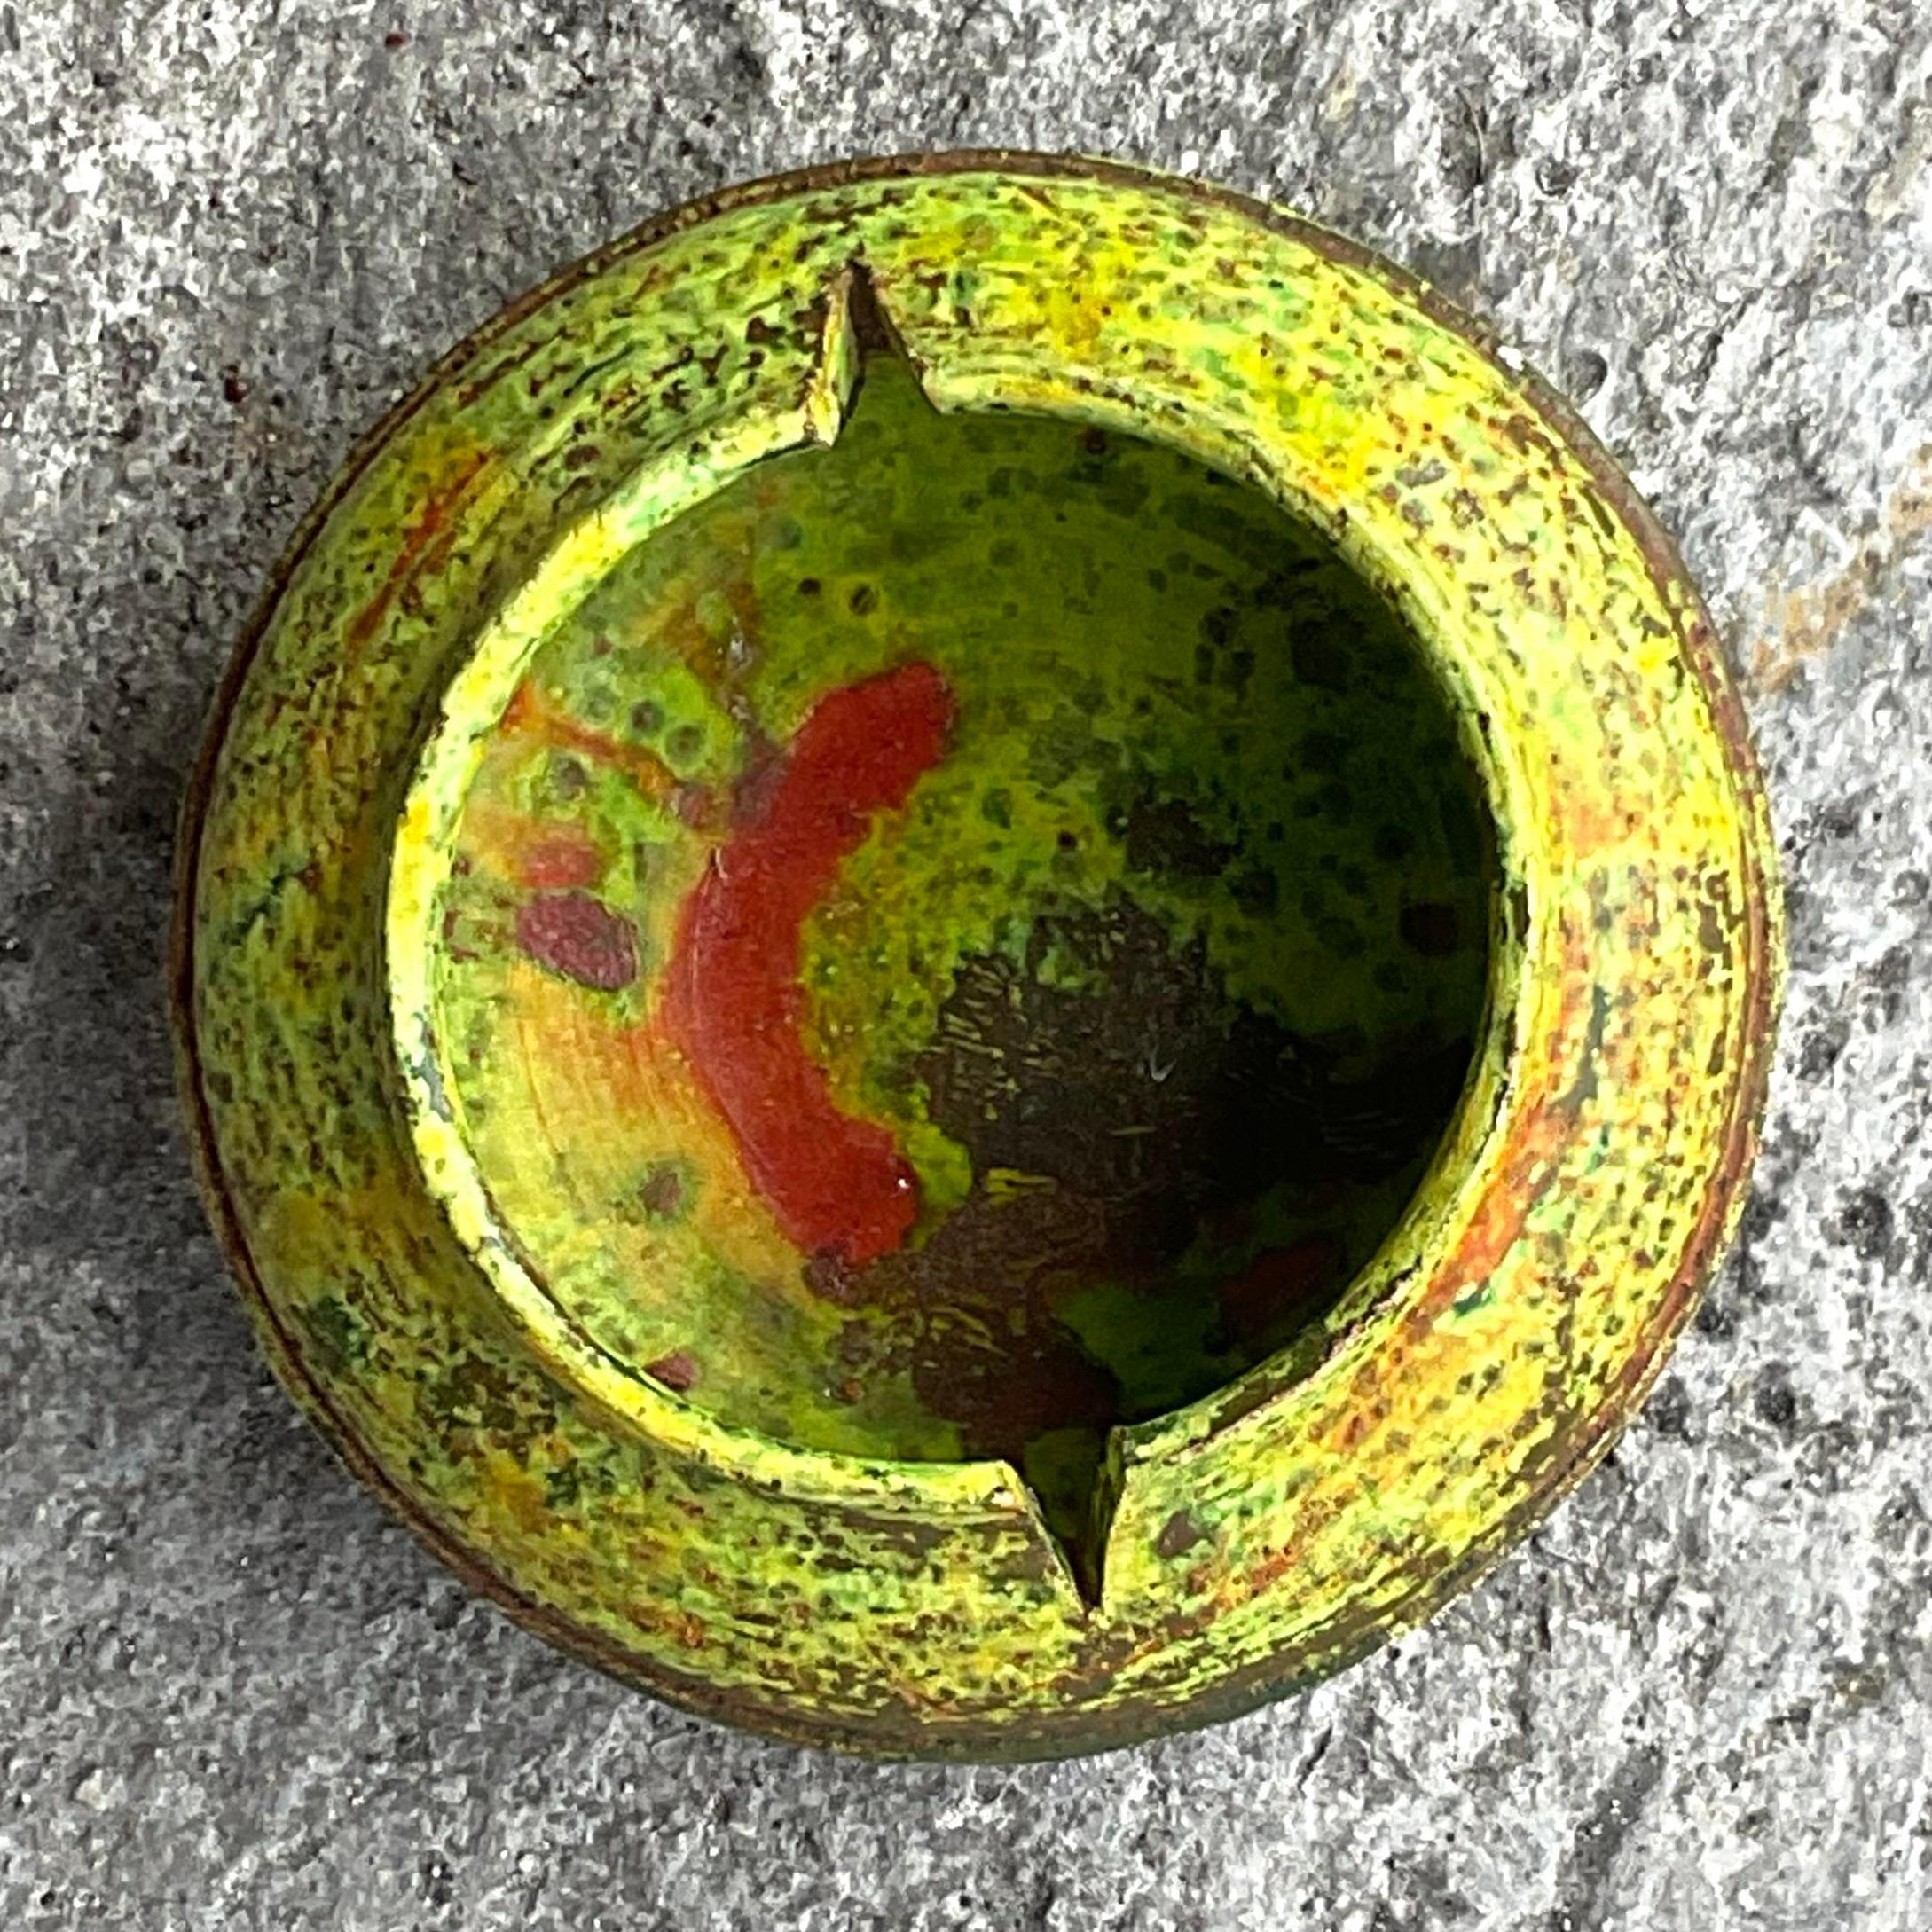 A fabulous vintage MCM ceramic ashtray. Made by the iconic Marcello a Fantoni and signed on the bottom. A brilliant chartreuse green with flashes of red and yellow. Acquired from a Palm Beach estate. 